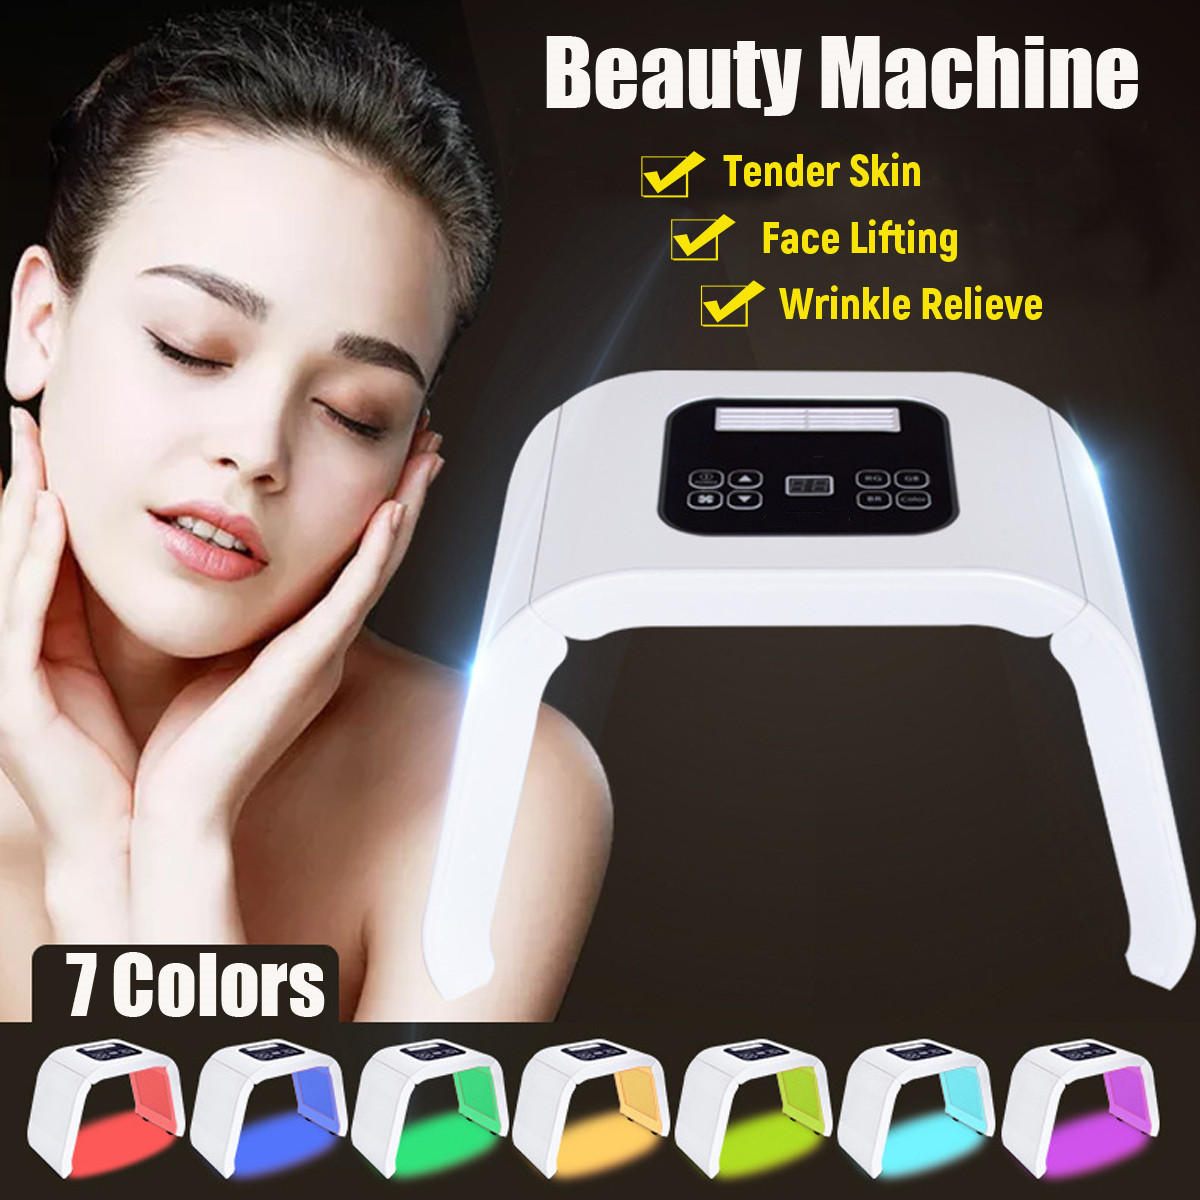 Image of 7 Color LED Light Therapy Skin Rejuvenation PDT Anti-aging Facial Beauty Machine